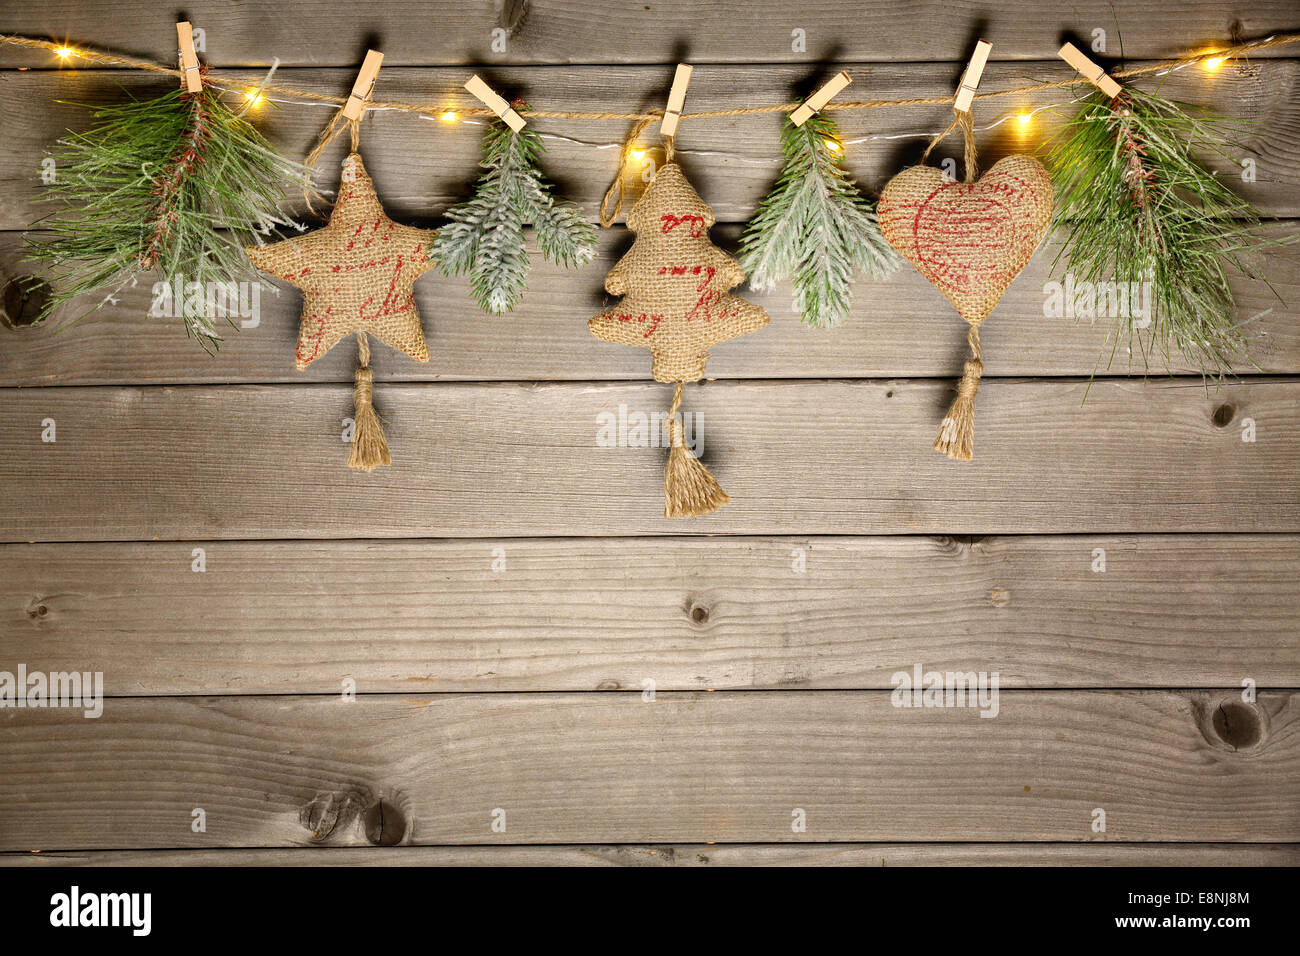 Christmas decoration over wooden background Stock Photo